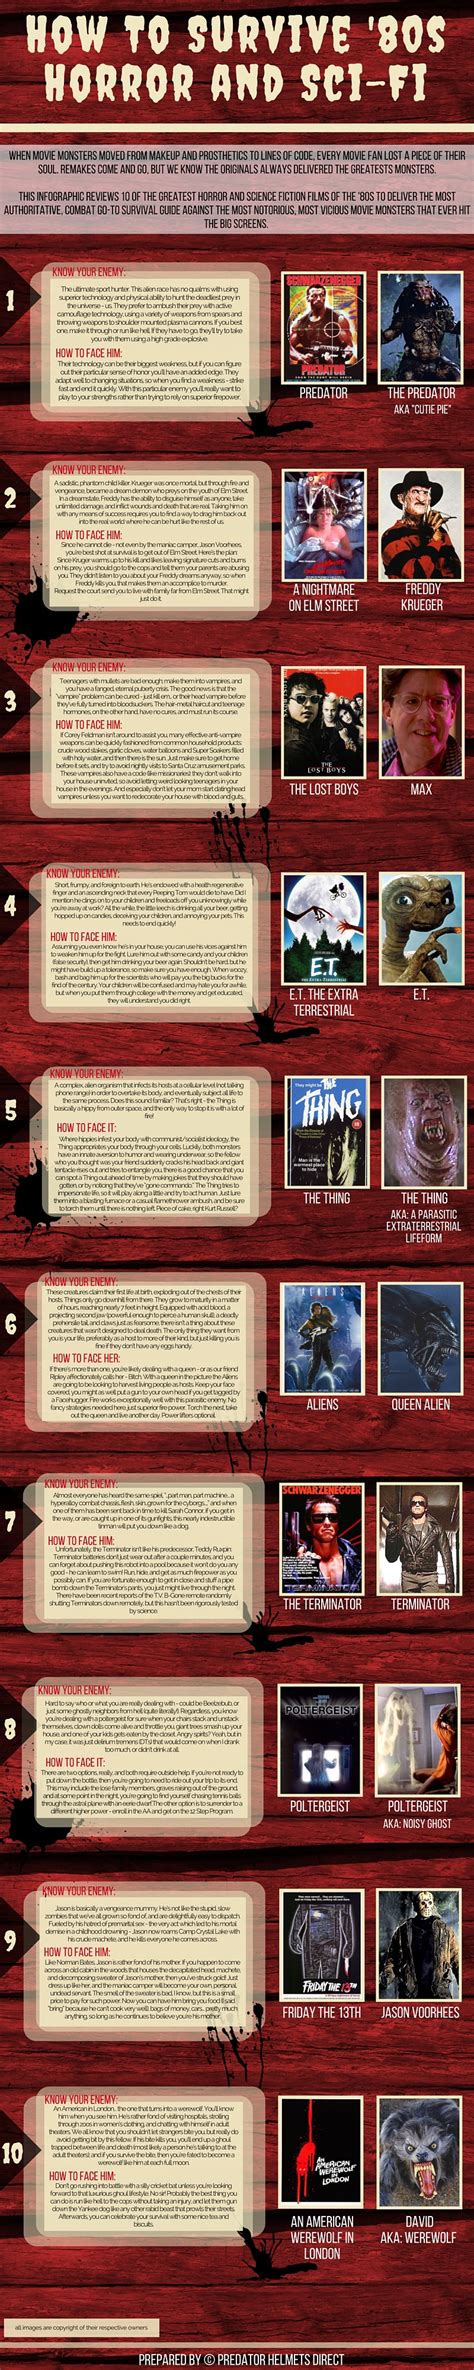 How to Survive '80s Horror and Sci-Fi [Infographic] | 80s horror ...